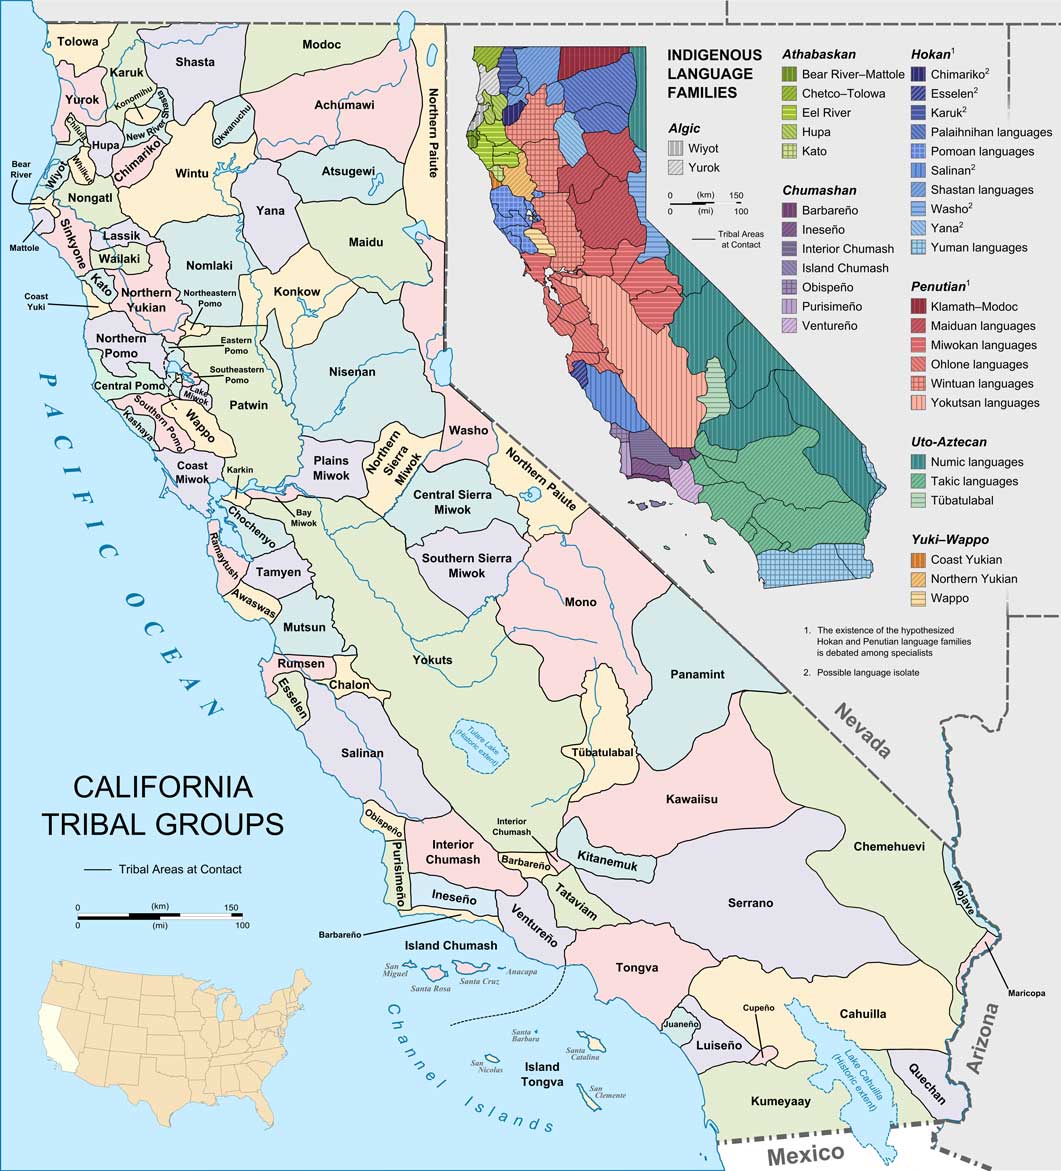 California tribes & languages at contact.png